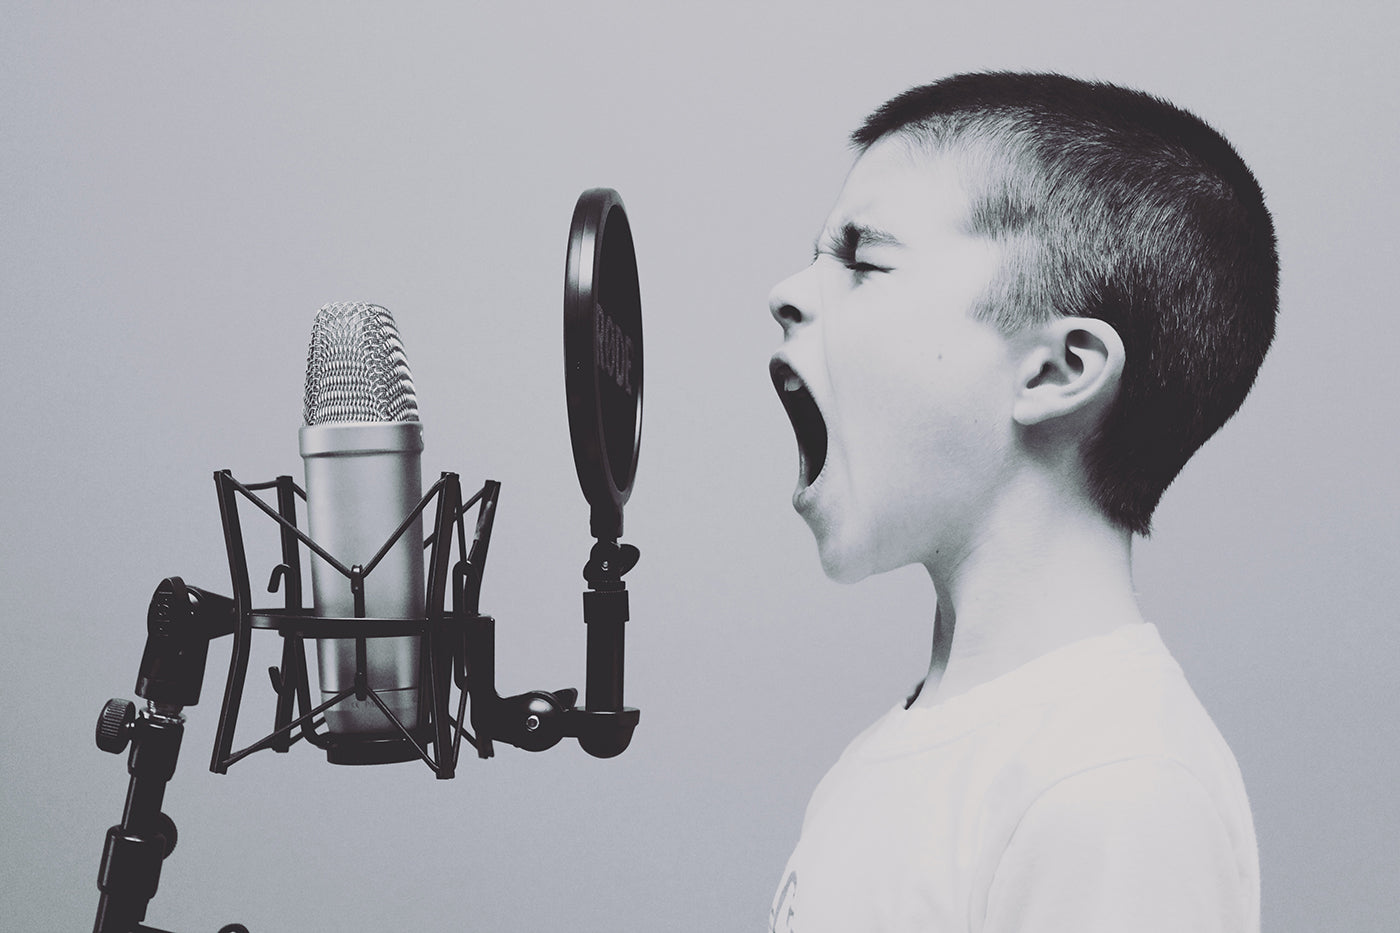 How to motivate your child to practice music when they want to quit